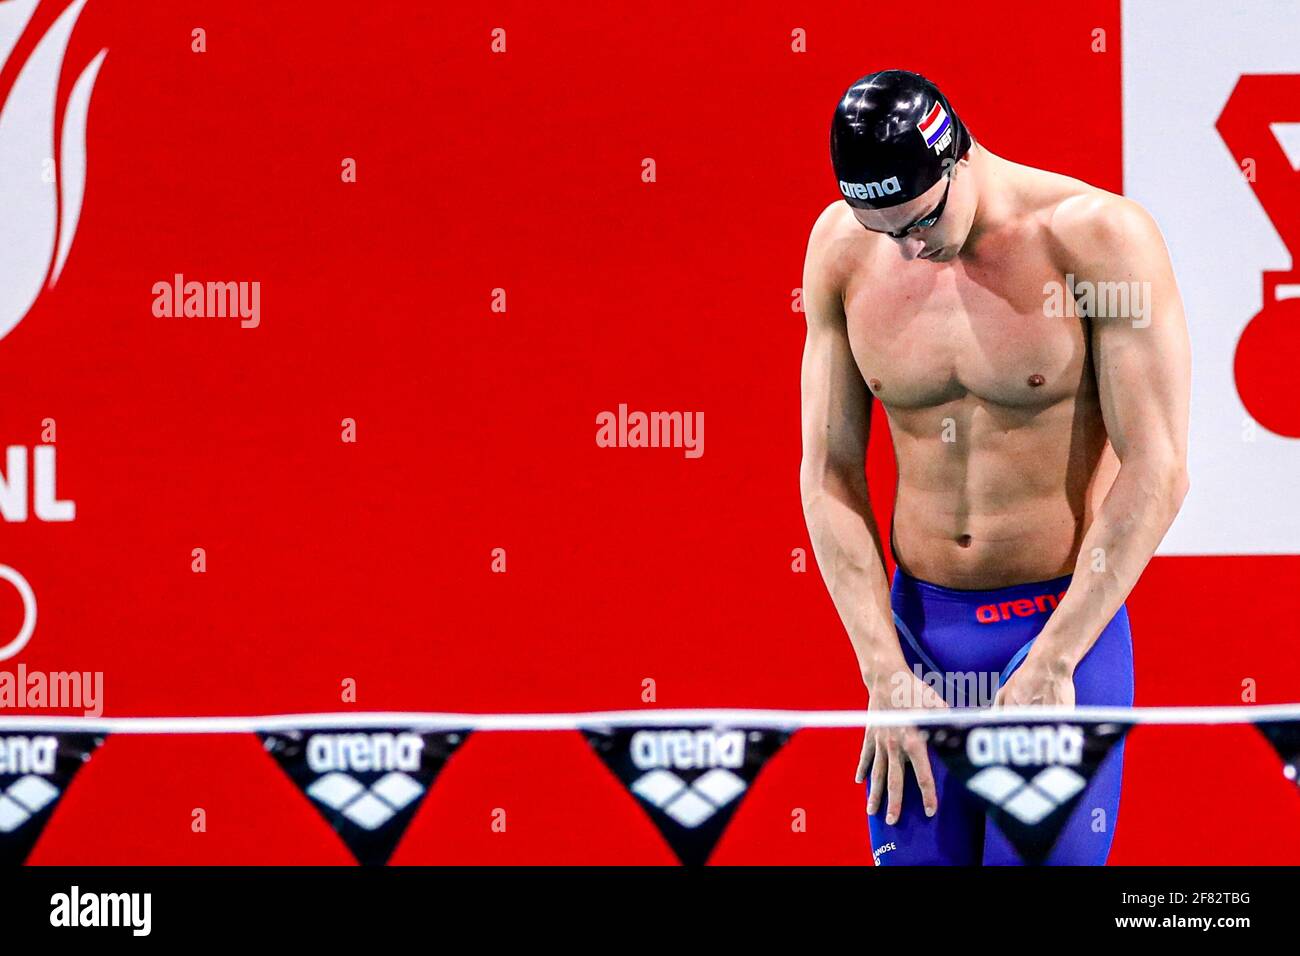 EINDHOVEN, NETHERLANDS - APRIL 11: Jesse Puts of the Netherlands competing in the Men 50m Butterfly during the Eindhoven Qualification Meet at Pieter van den Hoogenband zwemstadion on April 11, 2021 in Eindhoven, Netherlands (Photo by Marcel ter Bals/Orange Pictures) Stock Photo